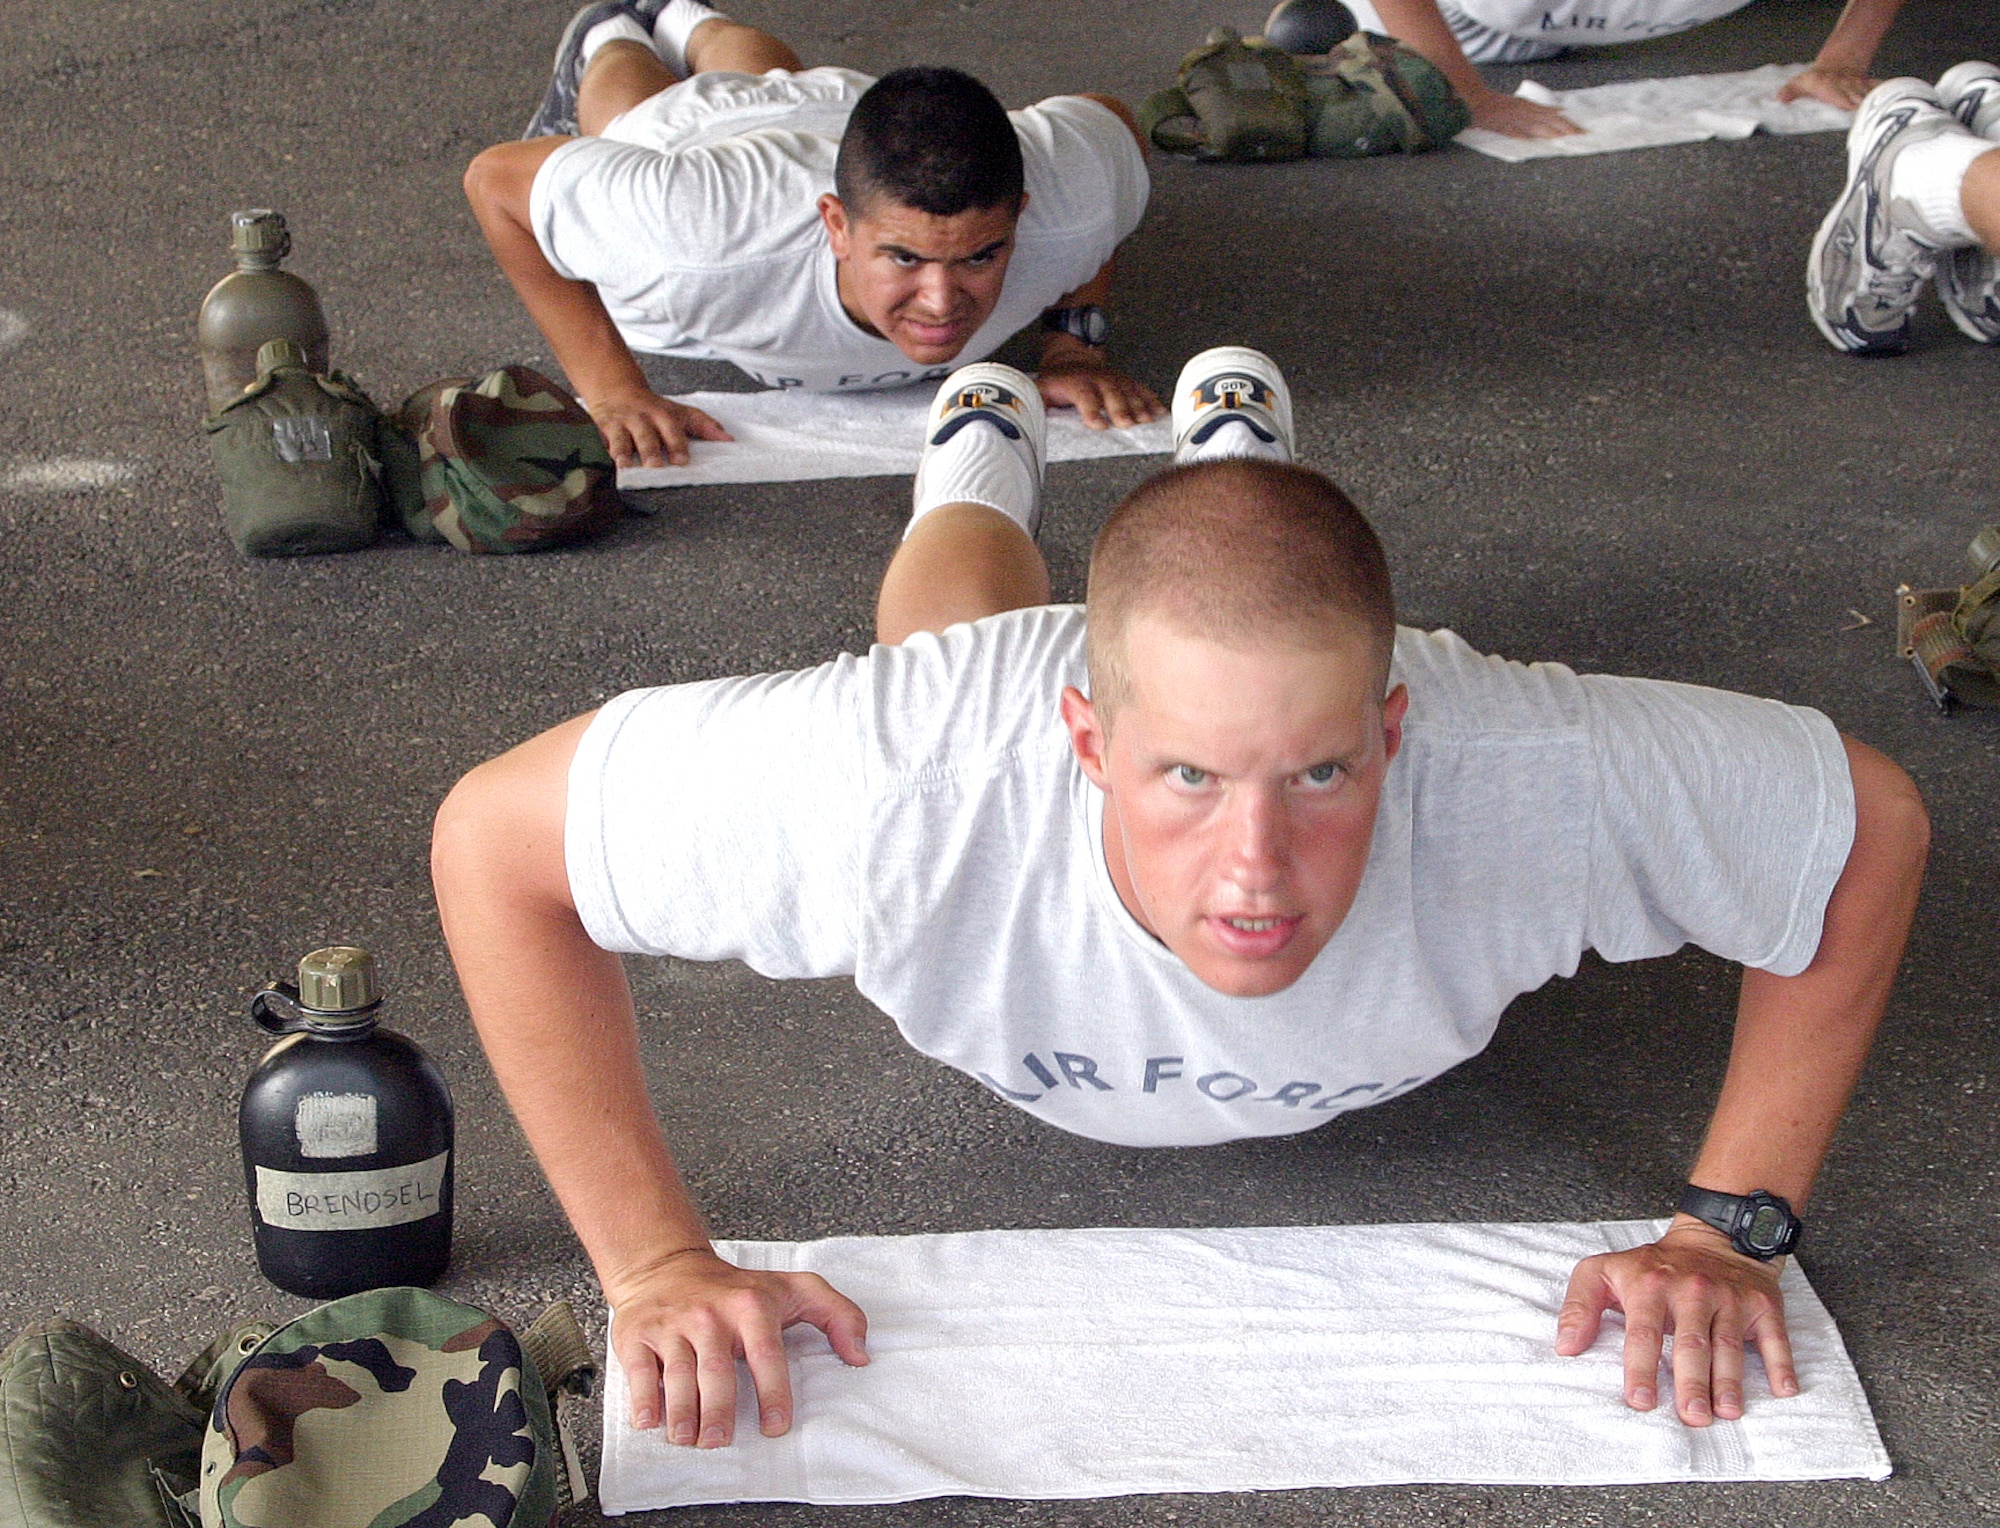 LACKLAND AIR FORCE BASE, Texas -- Cadet Eric Brendsel (foreground) does push-ups during afternoon physical training for ROTC cadets here.  More than 500 cadets completed six weeks of ROTC field training here July 23.  Cadet Brendsel is a student at the University of Iowa.  (U.S. Air Force photo by Robbin Creswell)